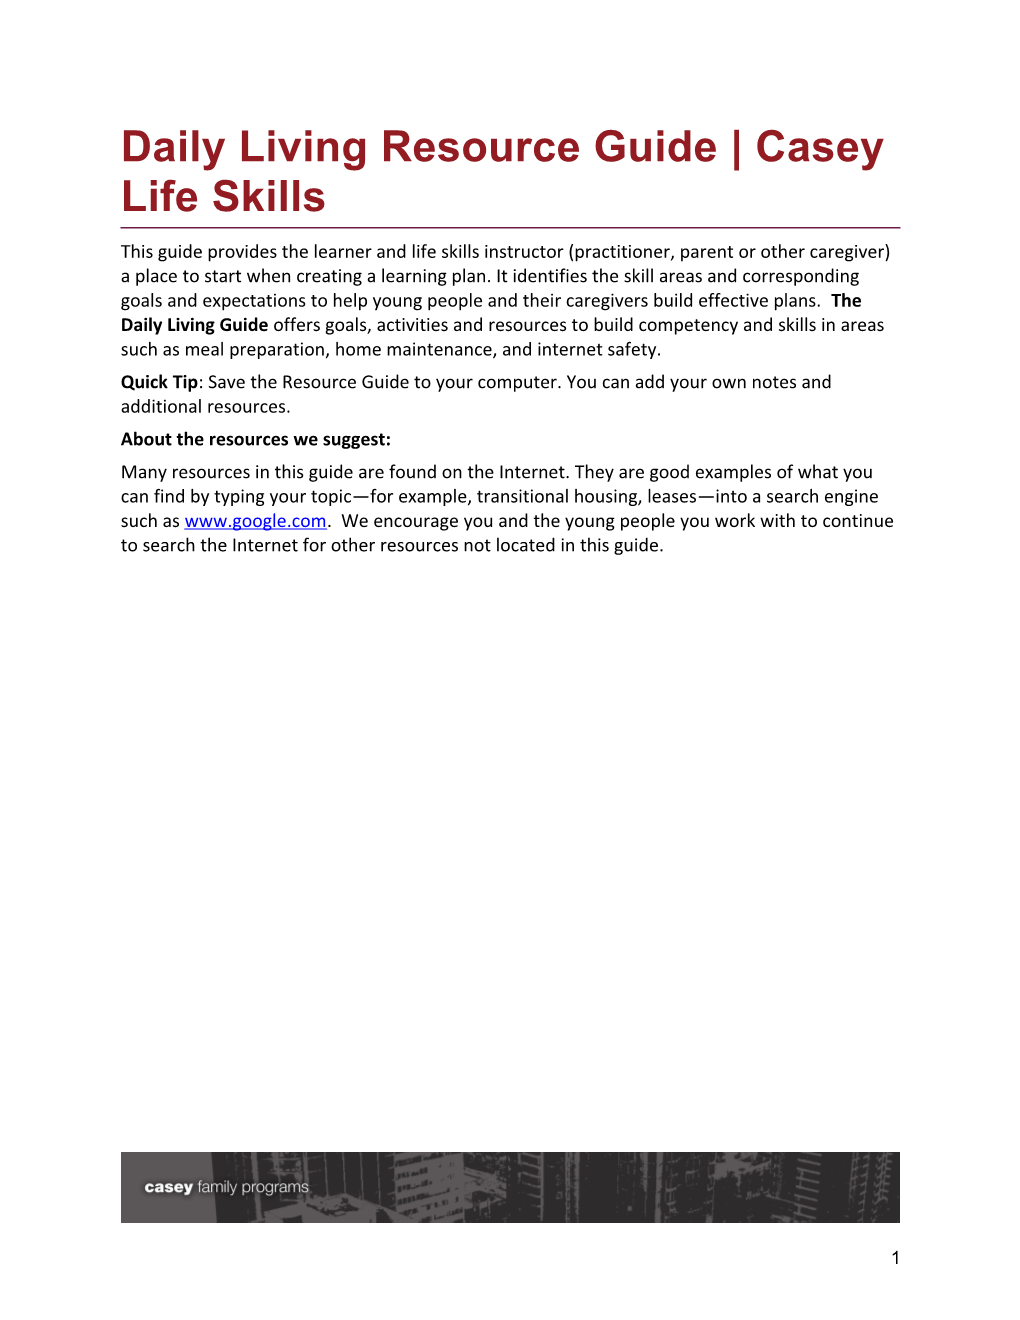 Daily Living Resource Guide Casey Life Skills